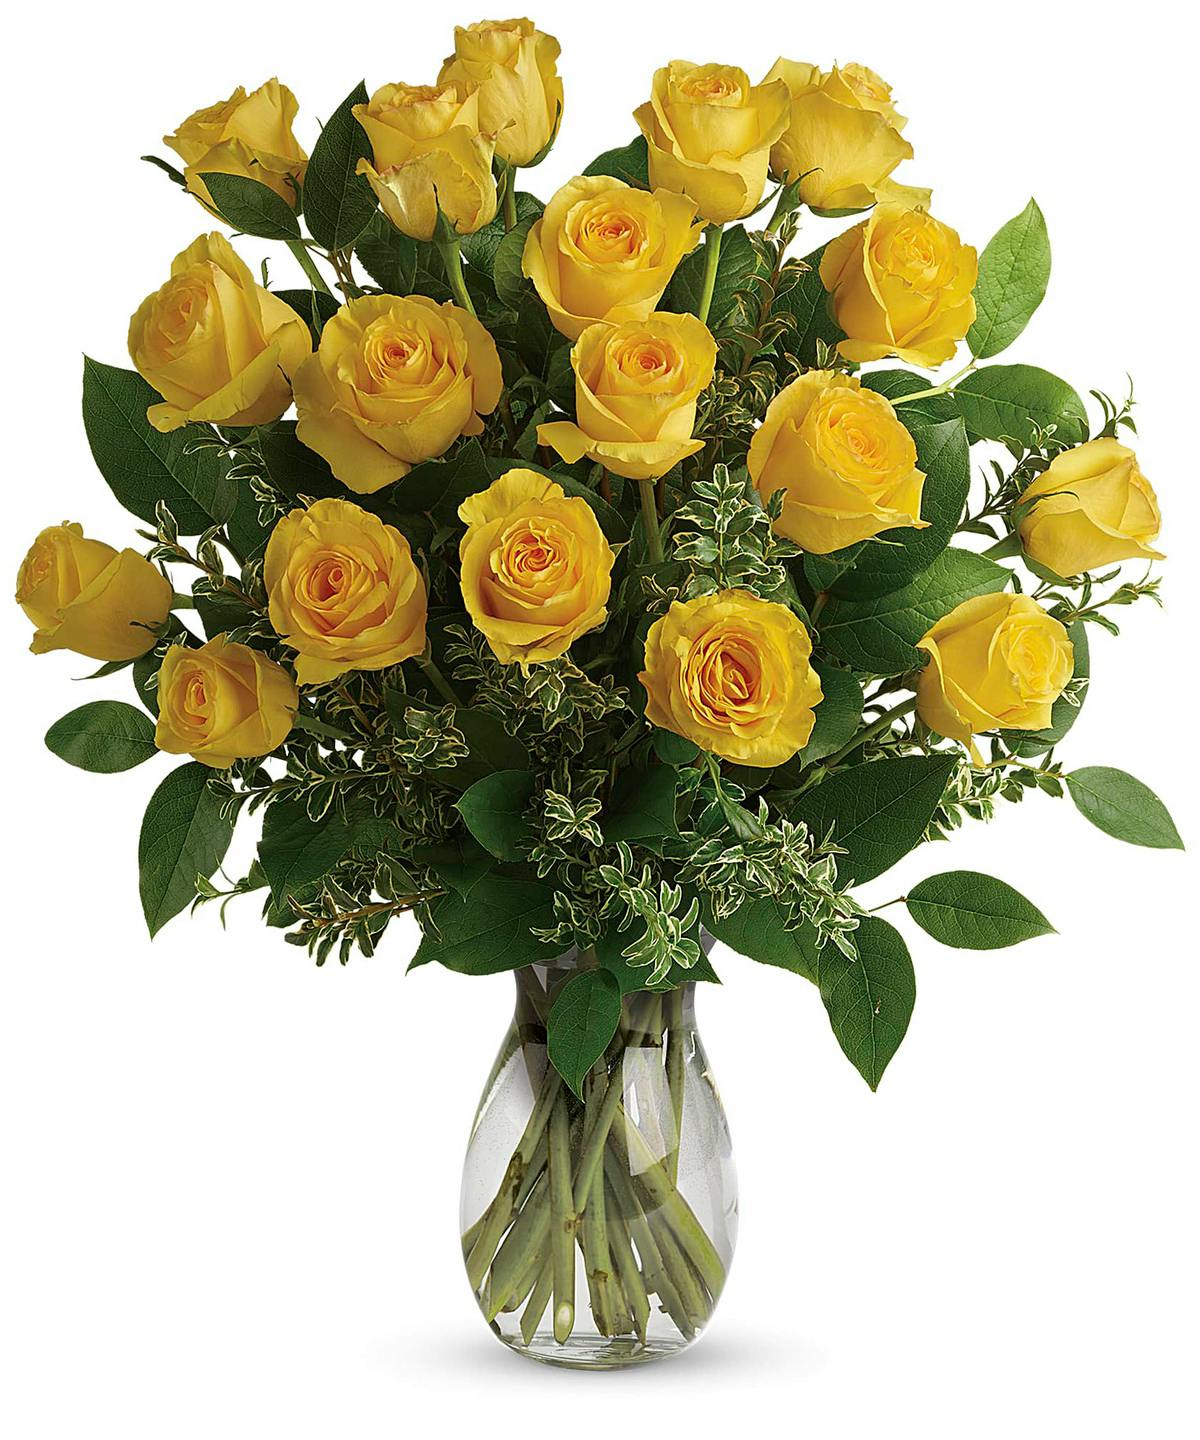 Long Stem Yellow Roses | Same-Day Portsmouth NH Flower ...